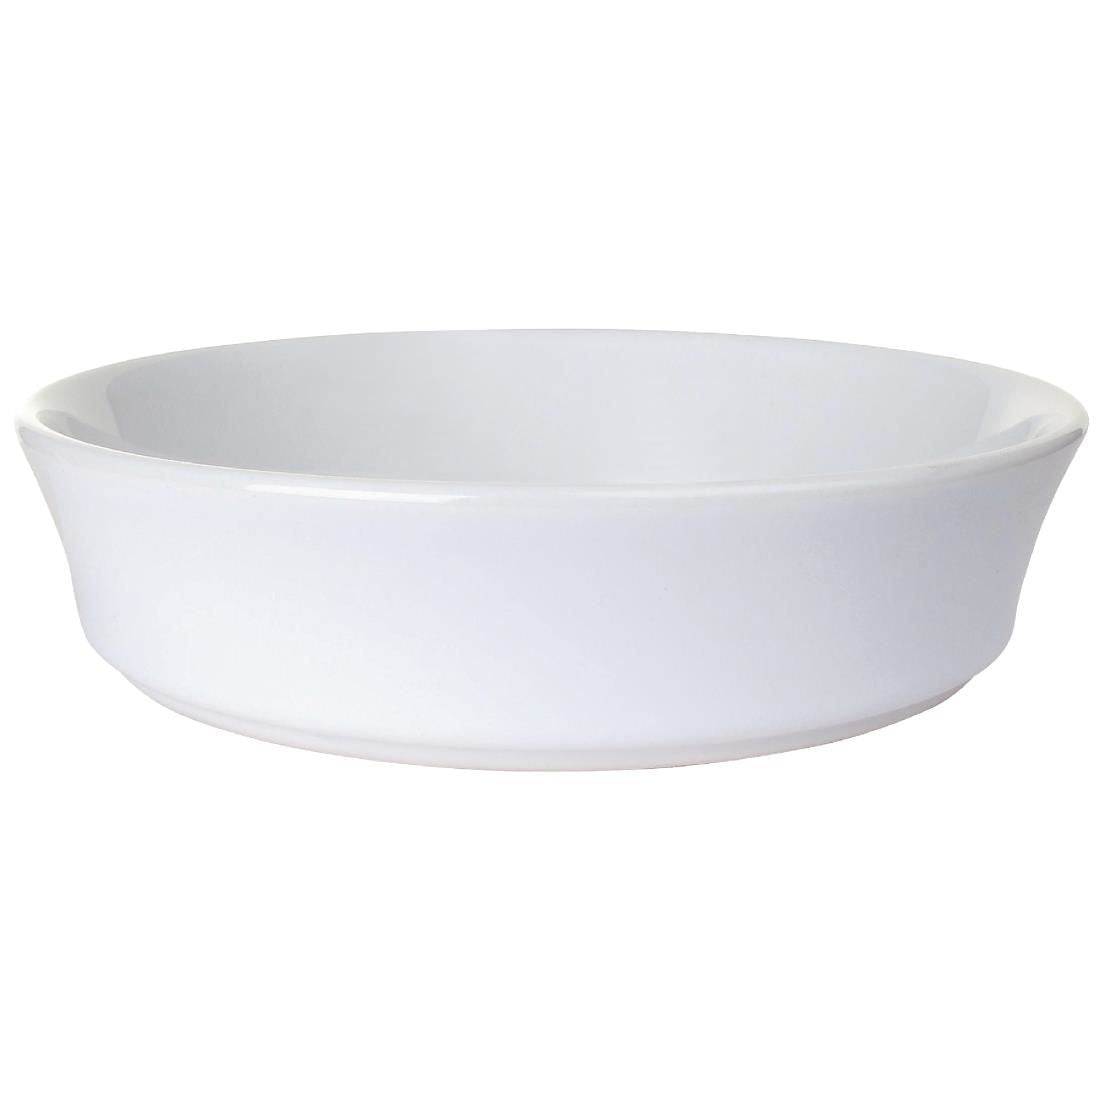 DB039 Revol Alexandrie Creme Brulee Dishes 140mm (Pack of 6) JD Catering Equipment Solutions Ltd